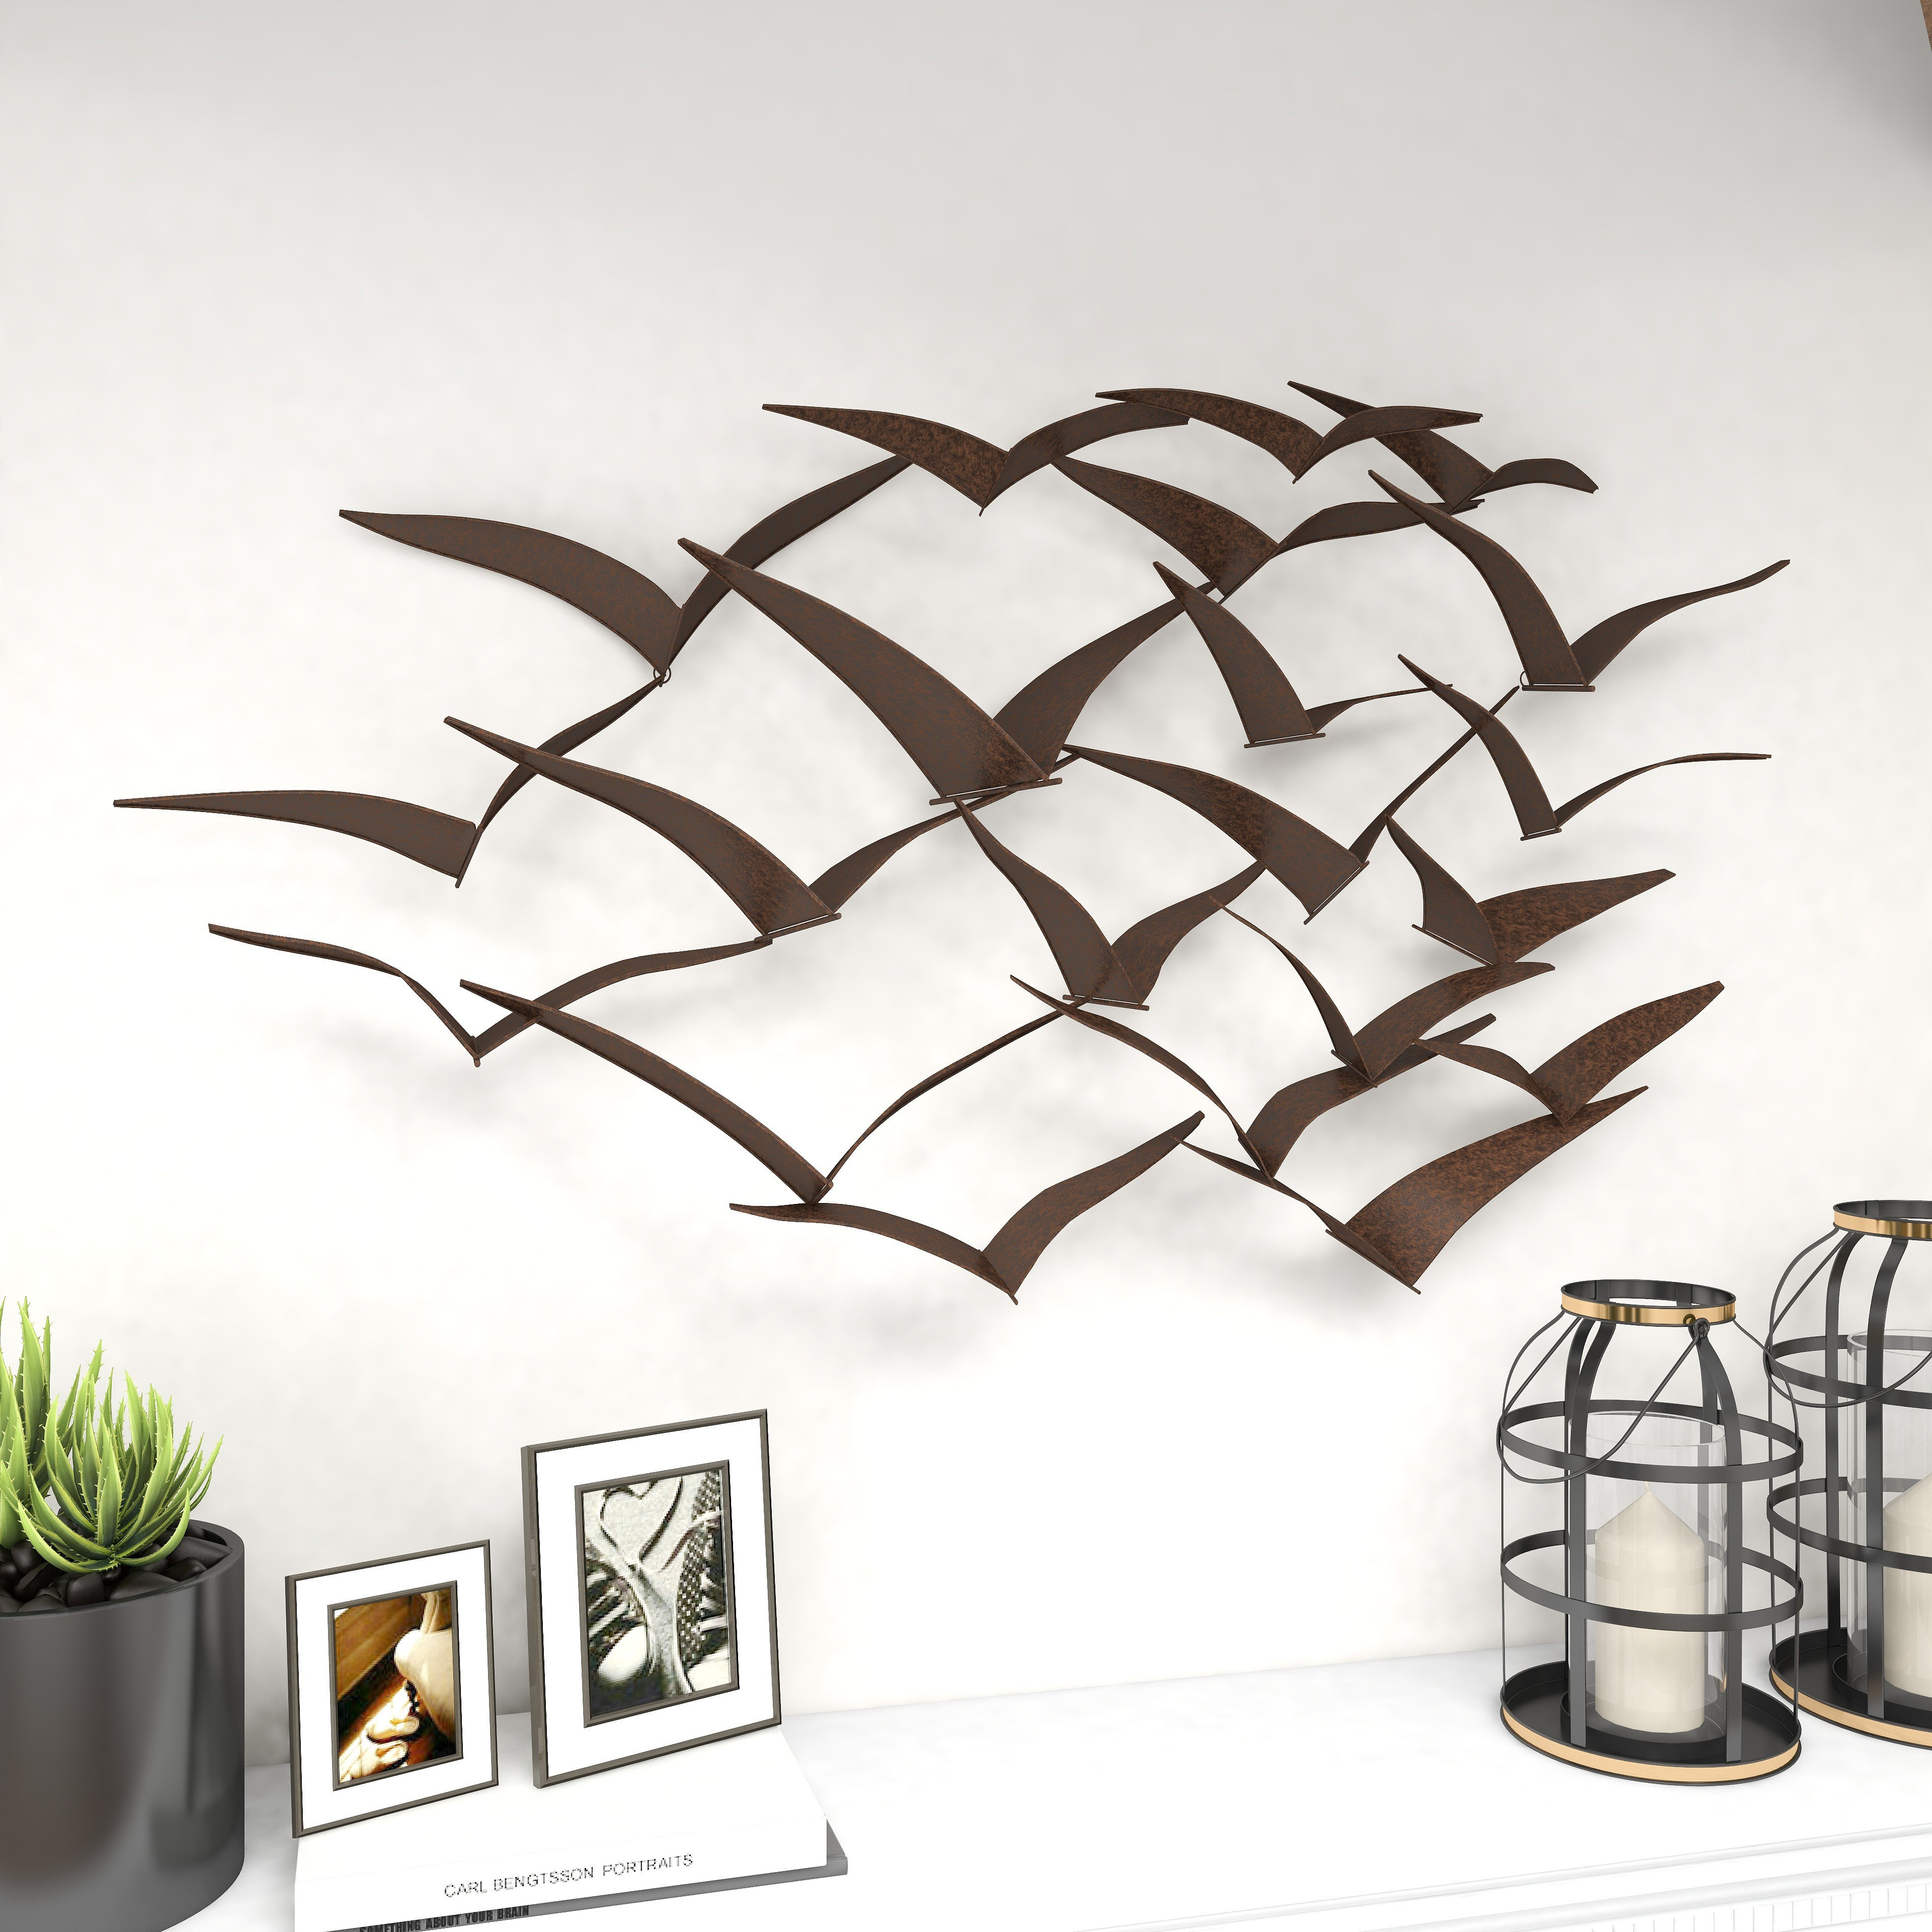 Hanging Bird Décor - Perfect Tropical Accent - Ships Free